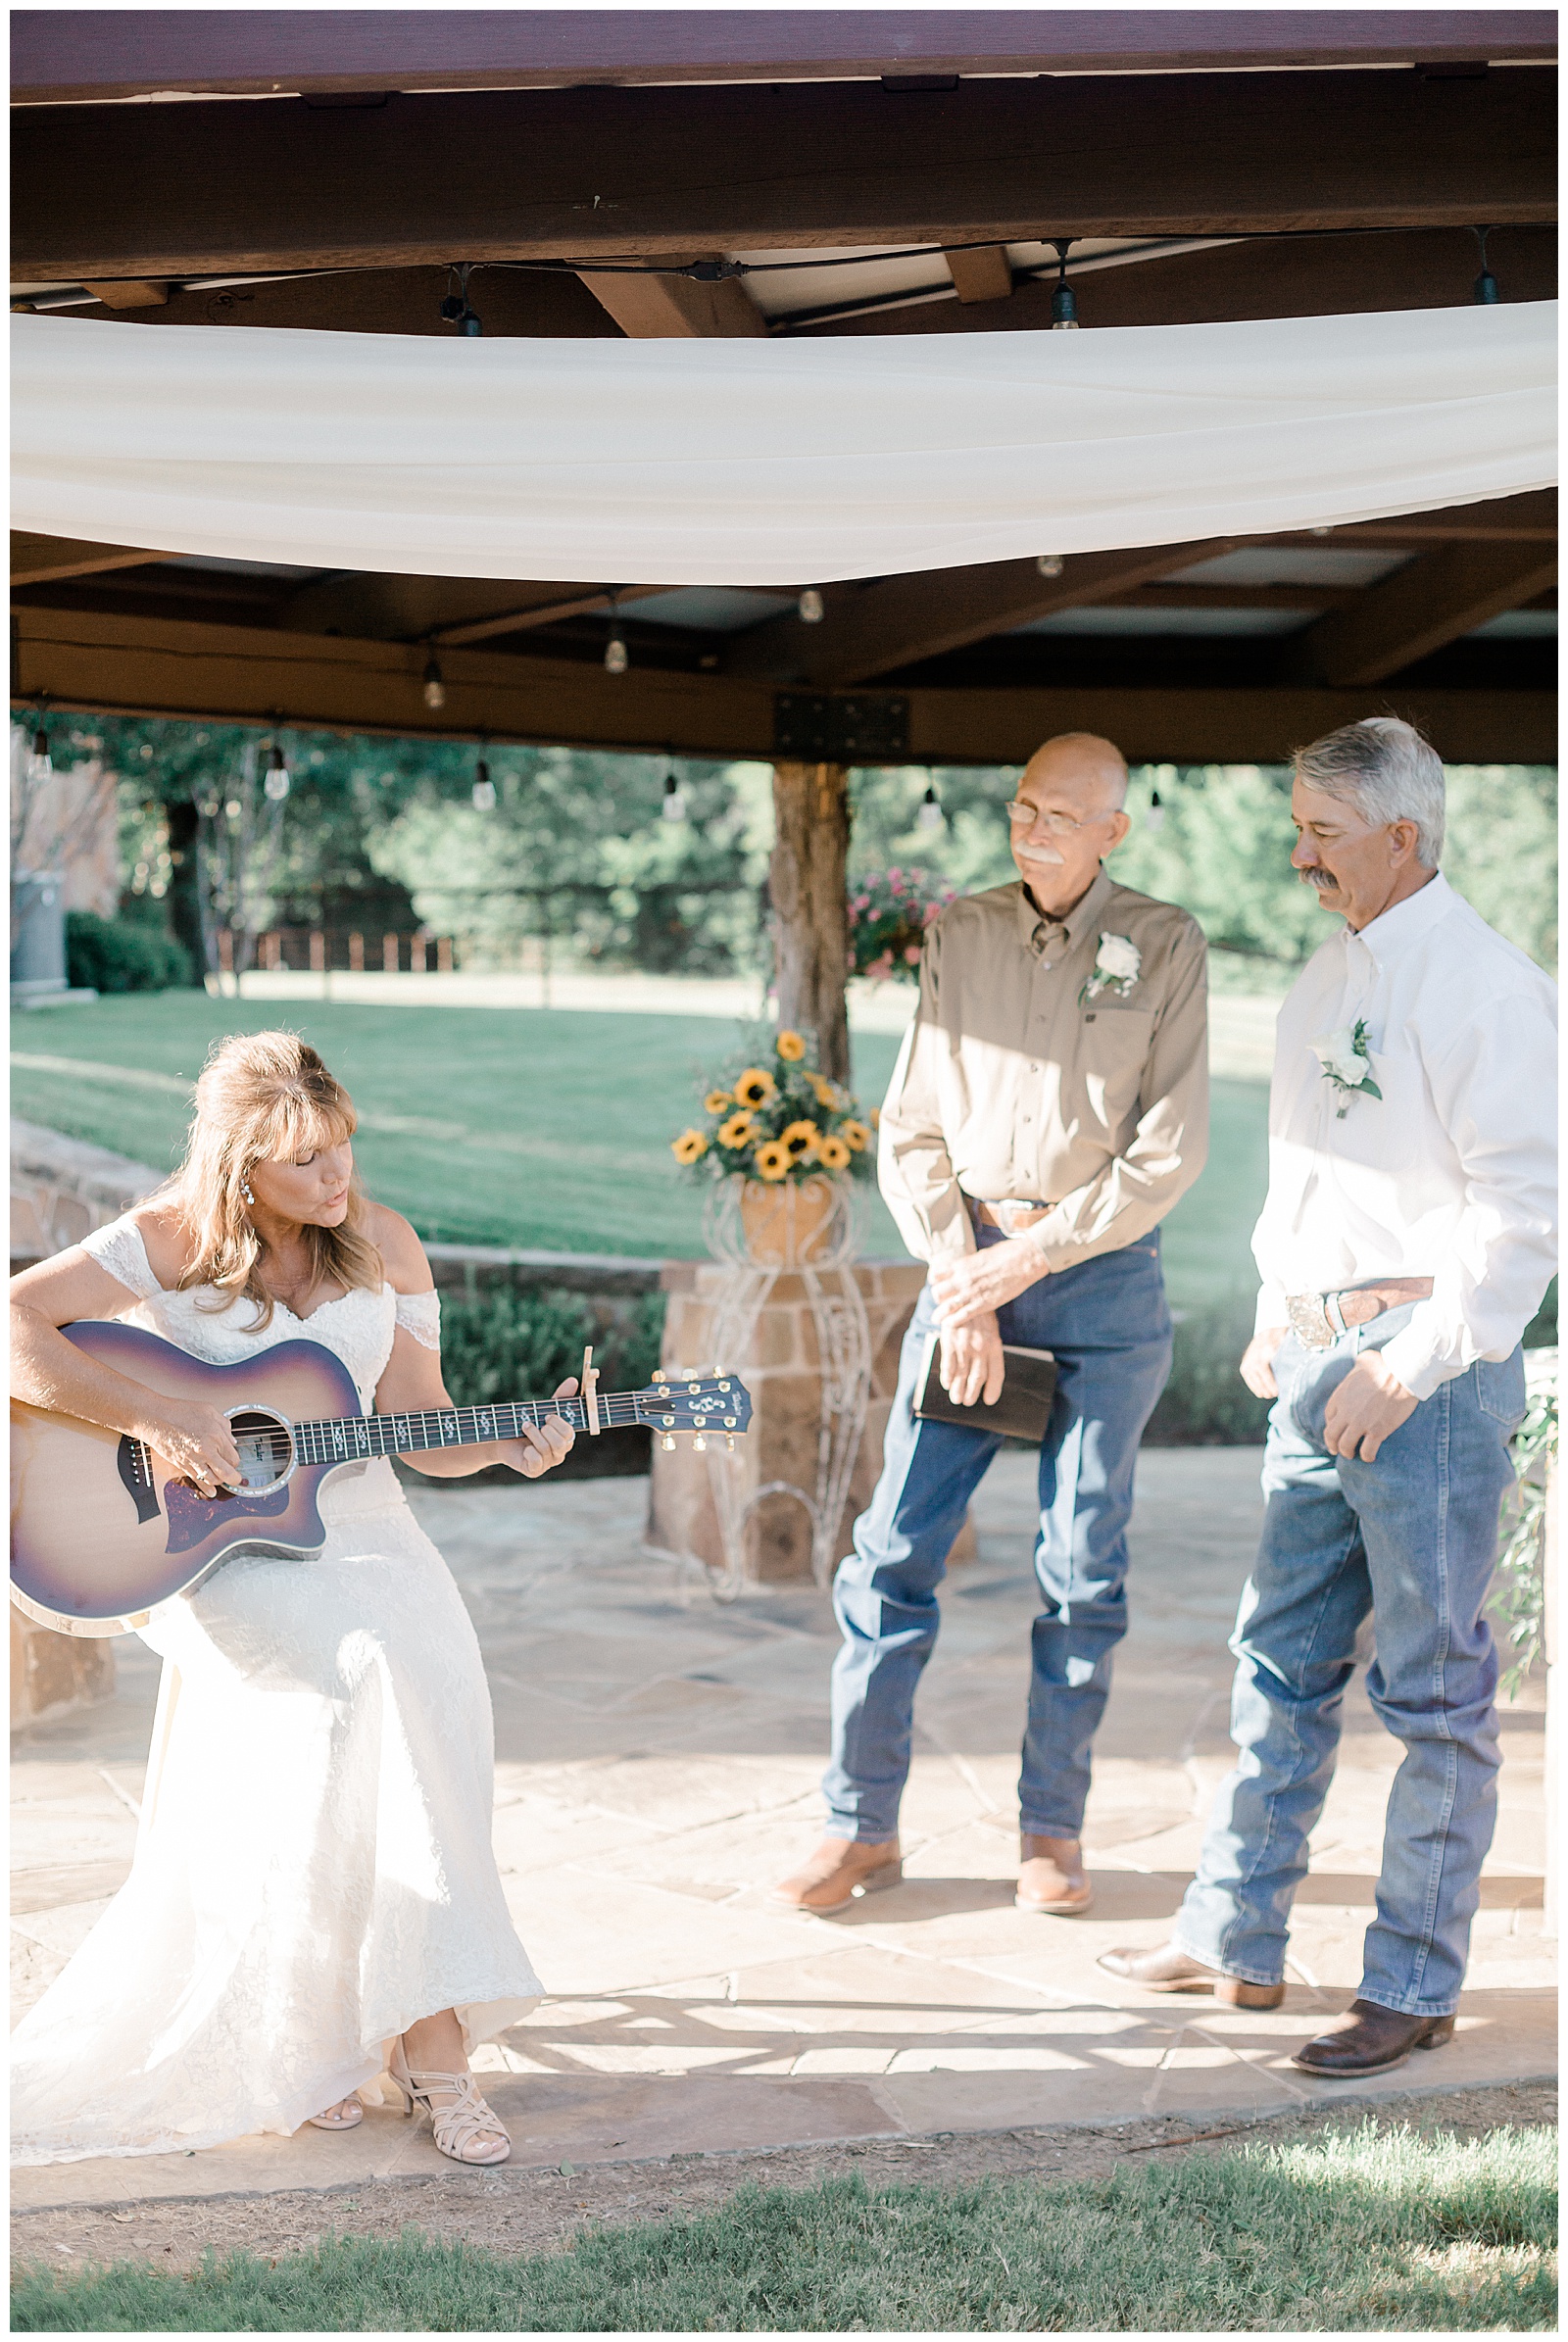 Bride sings to groom during ceremony